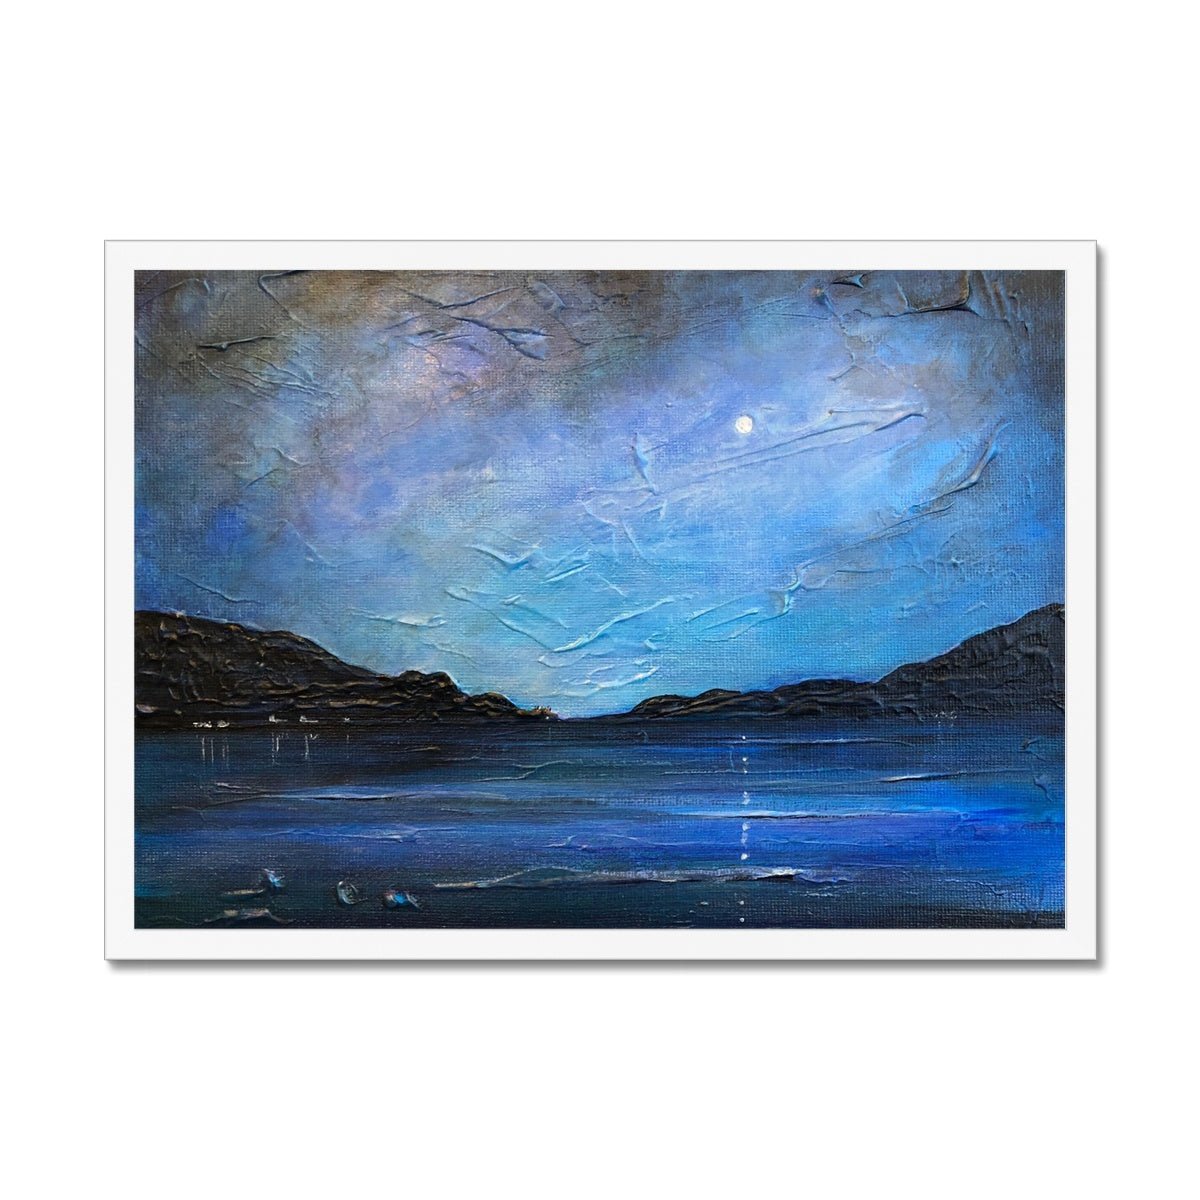 Loch Ness Moonlight Painting | Framed Prints From Scotland-Framed Prints-Scottish Lochs & Mountains Art Gallery-A2 Landscape-White Frame-Paintings, Prints, Homeware, Art Gifts From Scotland By Scottish Artist Kevin Hunter